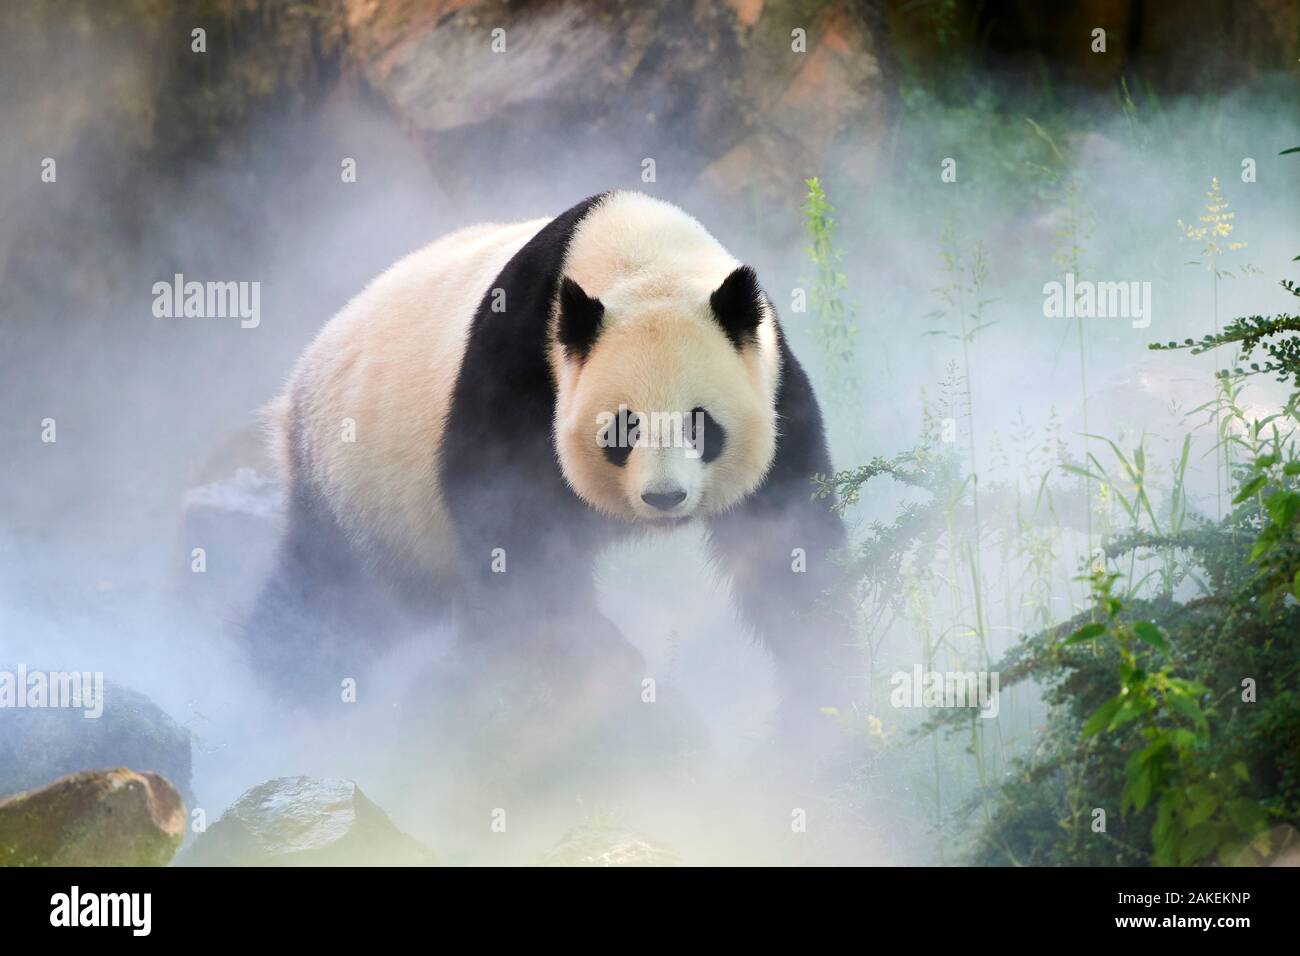 Giant panda (Ailuropoda melanoleuca) female, Huan Huan, out in her enclosure in mist, Captive at Beauval Zoo, Saint Aignan sur Cher, France  The mist is created artificially by machine, in order to create a cooler environment, closer to the conditions in their natural mountain habitat in China Stock Photo